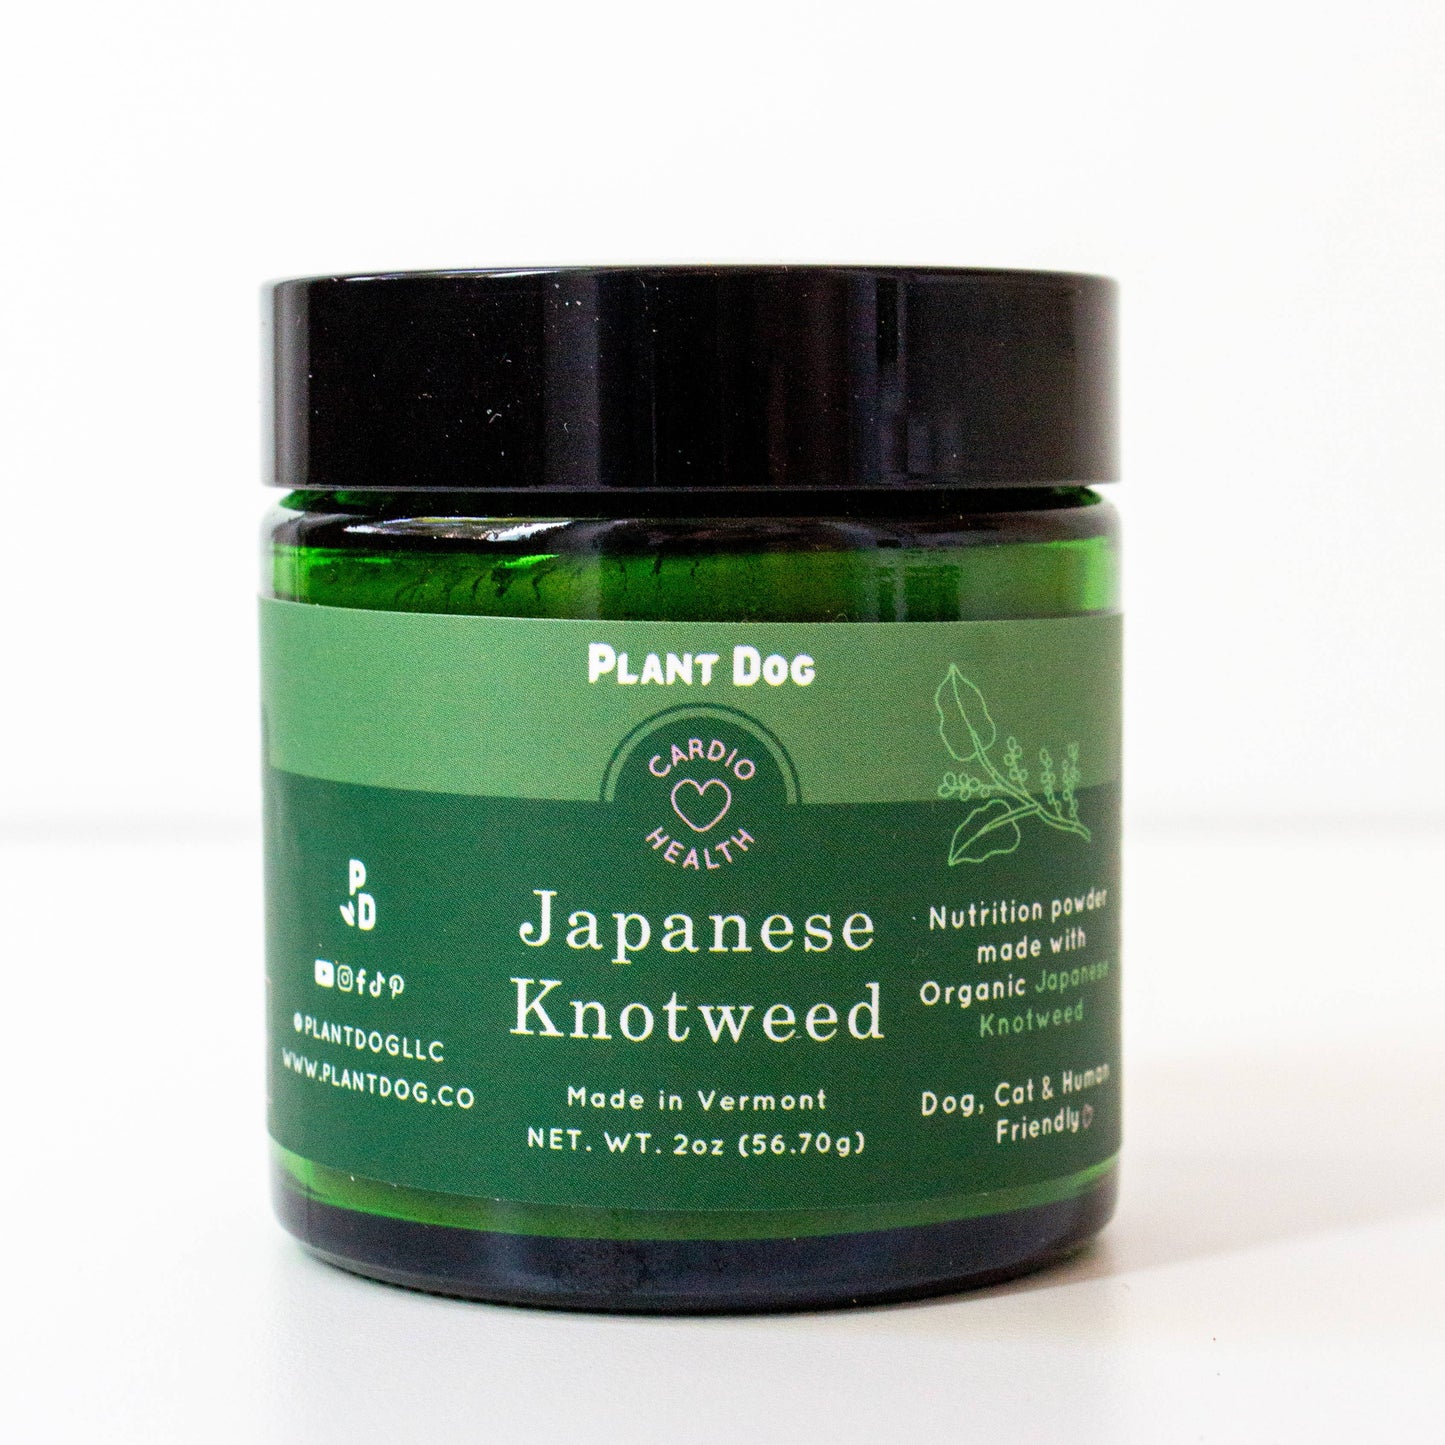 Plant Dog - Japanese Knotweed Powder Supplement for Dogs